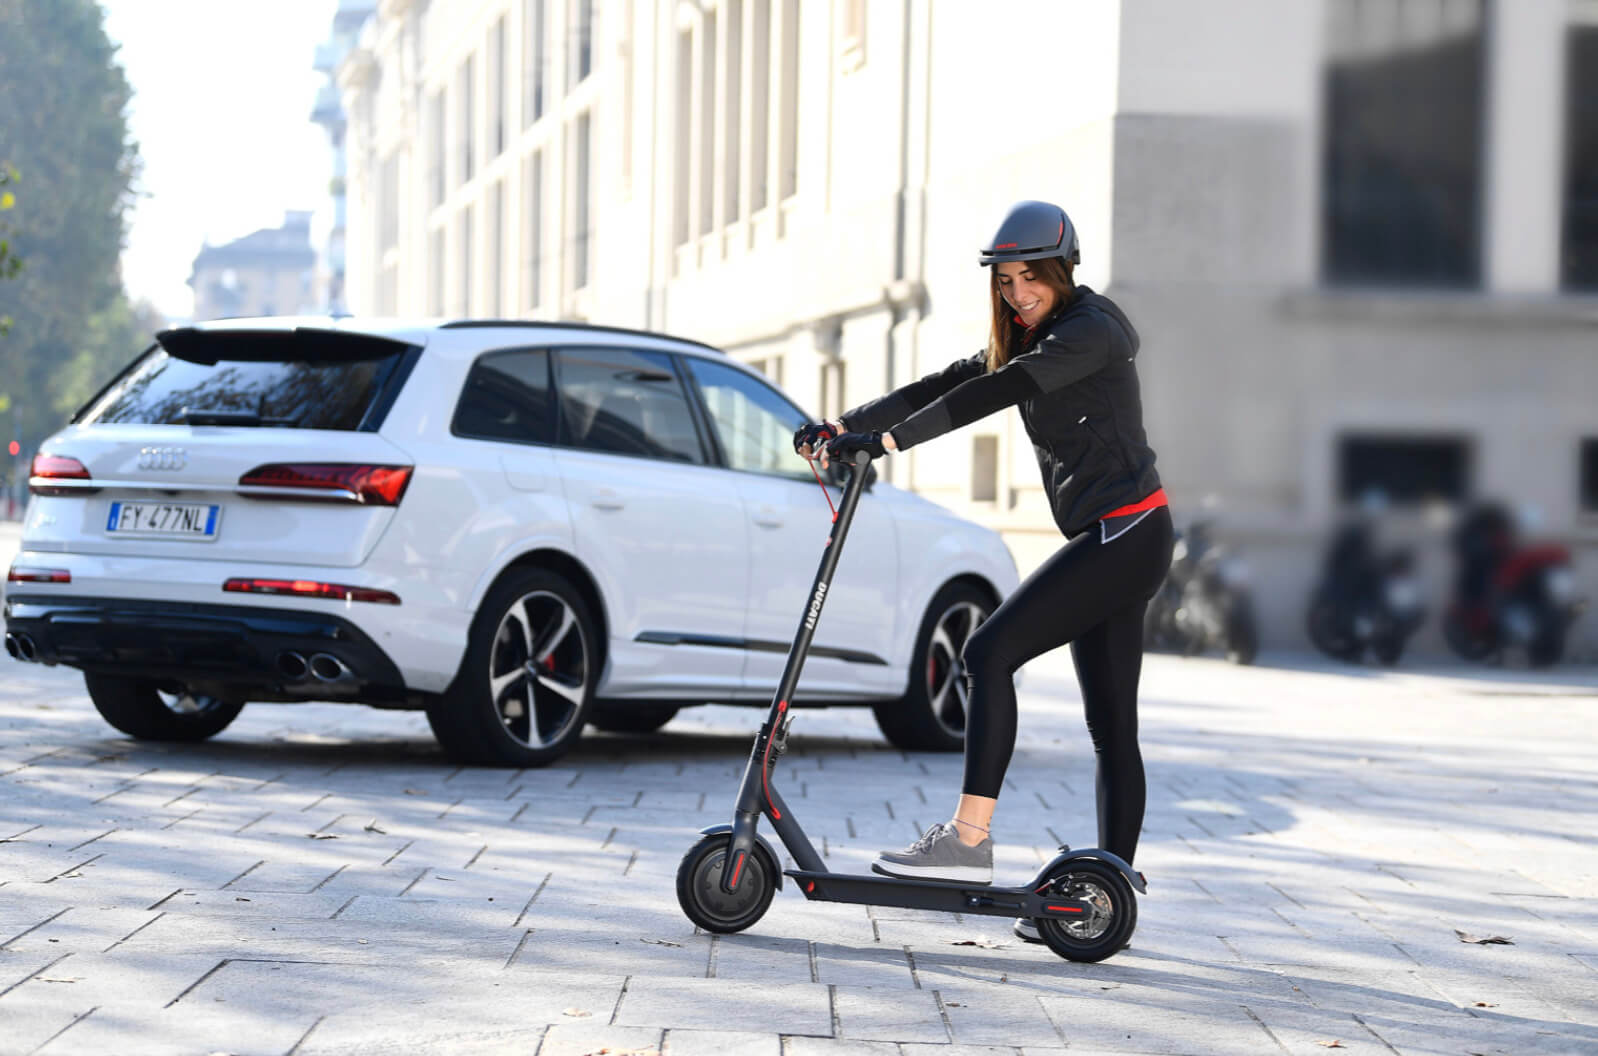 Luxuria Lifestyle welcomes Ducati Urban e-Mobility launching in the UK